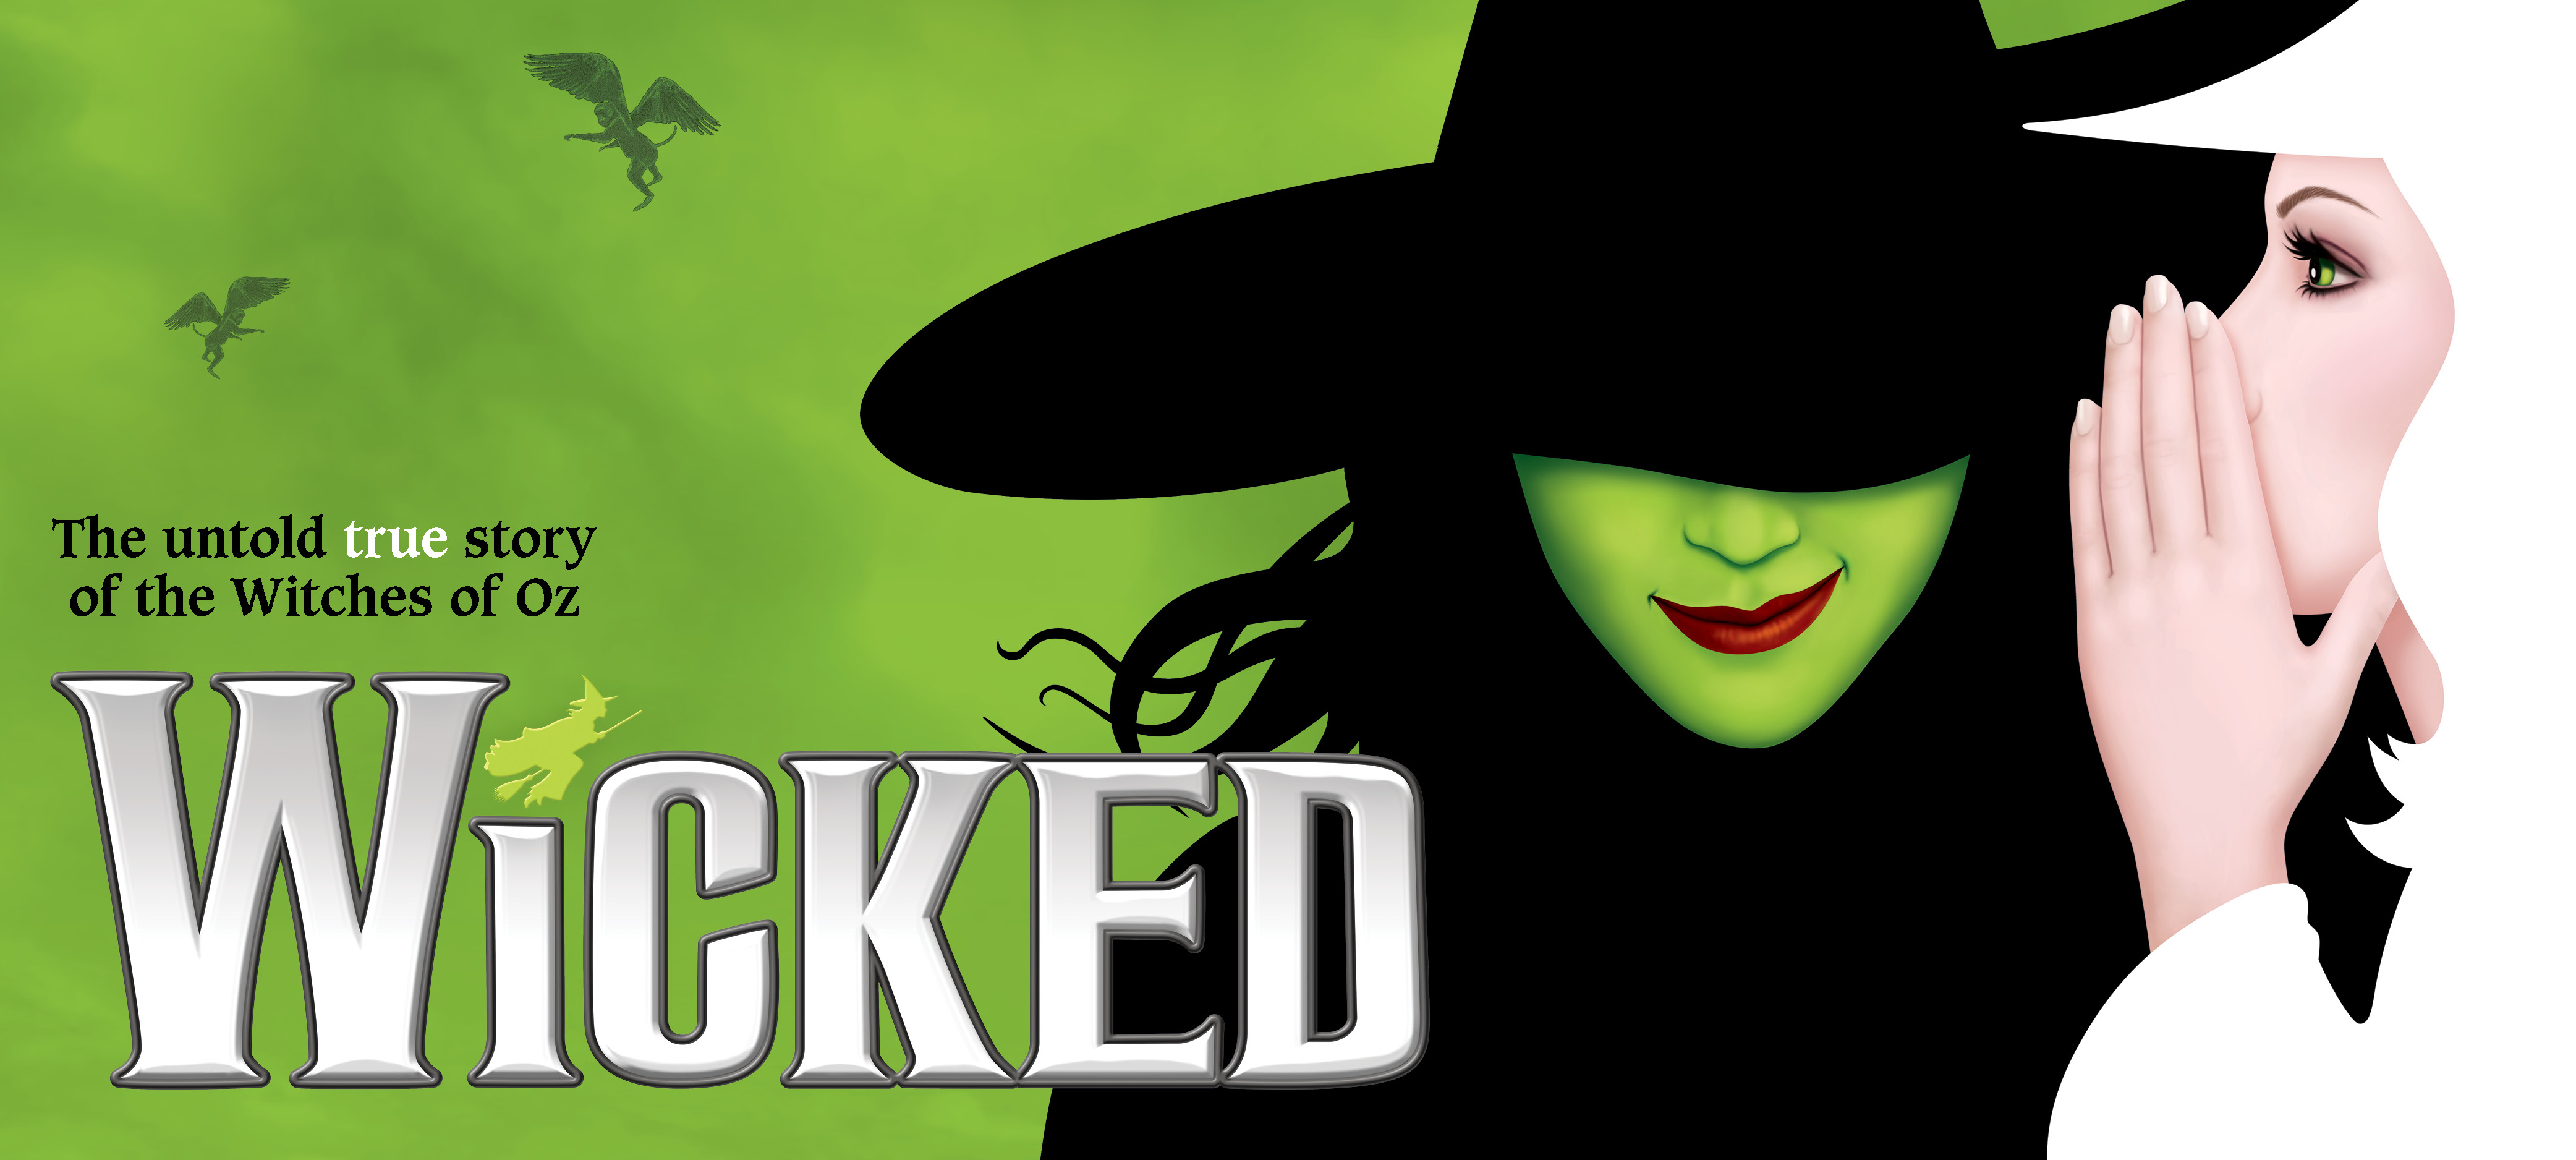 a week to be wicked pdf free download